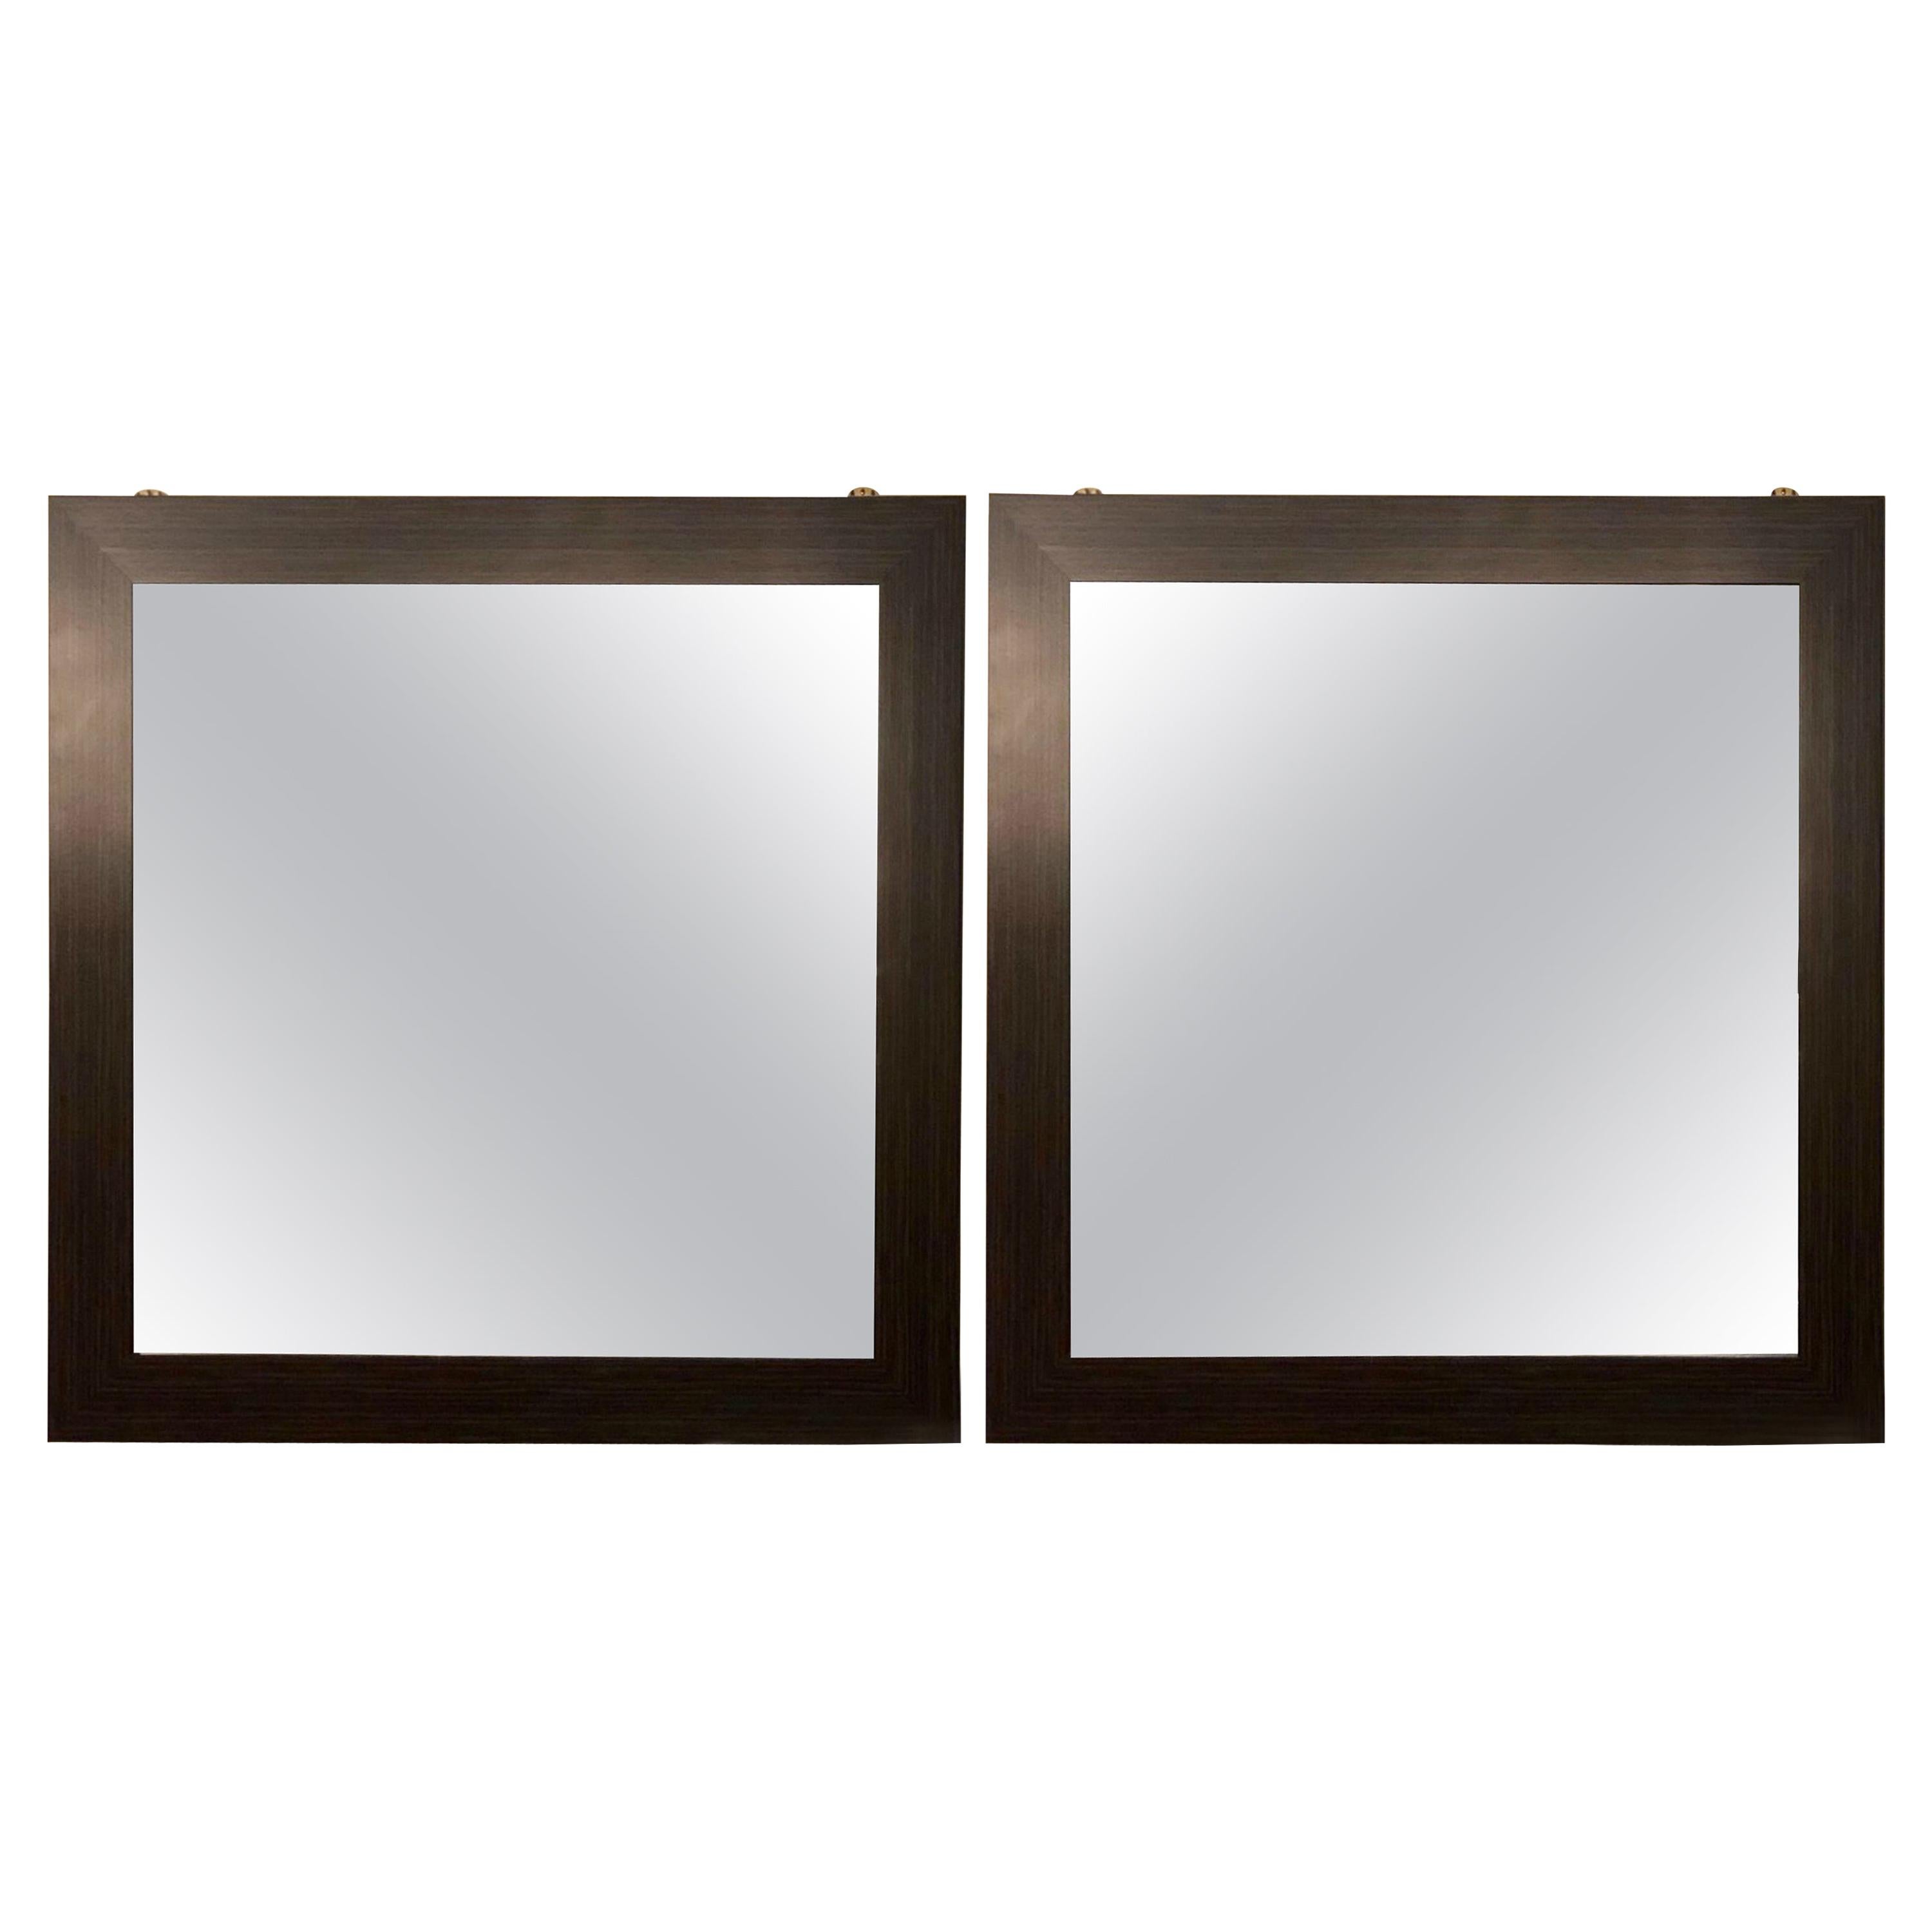 French Design, Art Deco Style, Wall Mirrors, Faux Macassar Ebony, Glass, 1970s For Sale